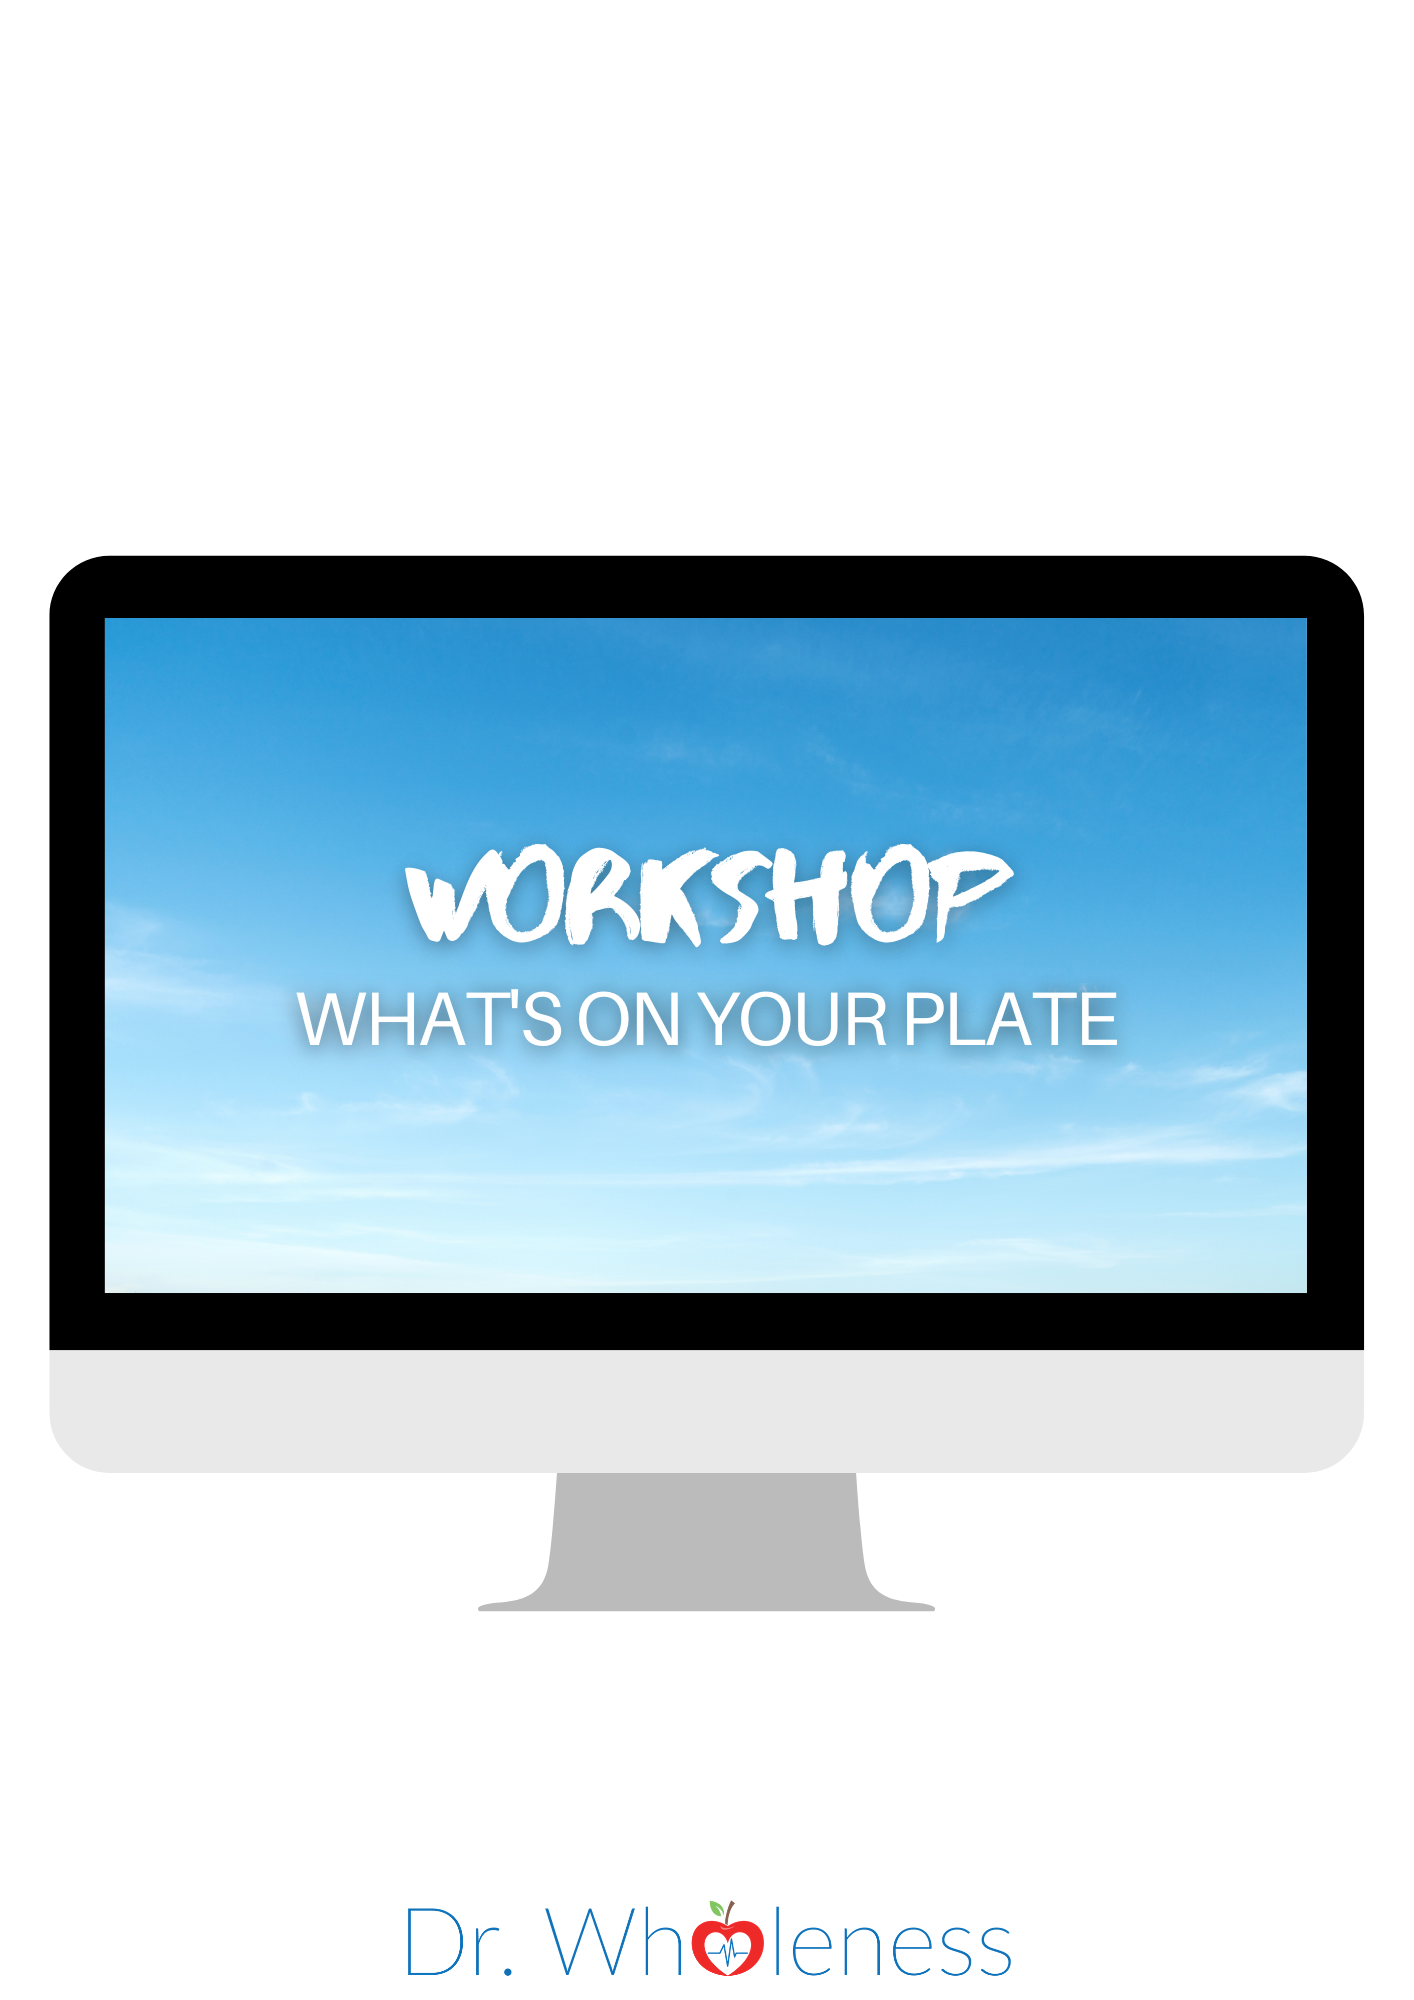 Workshop - What's on your plate?